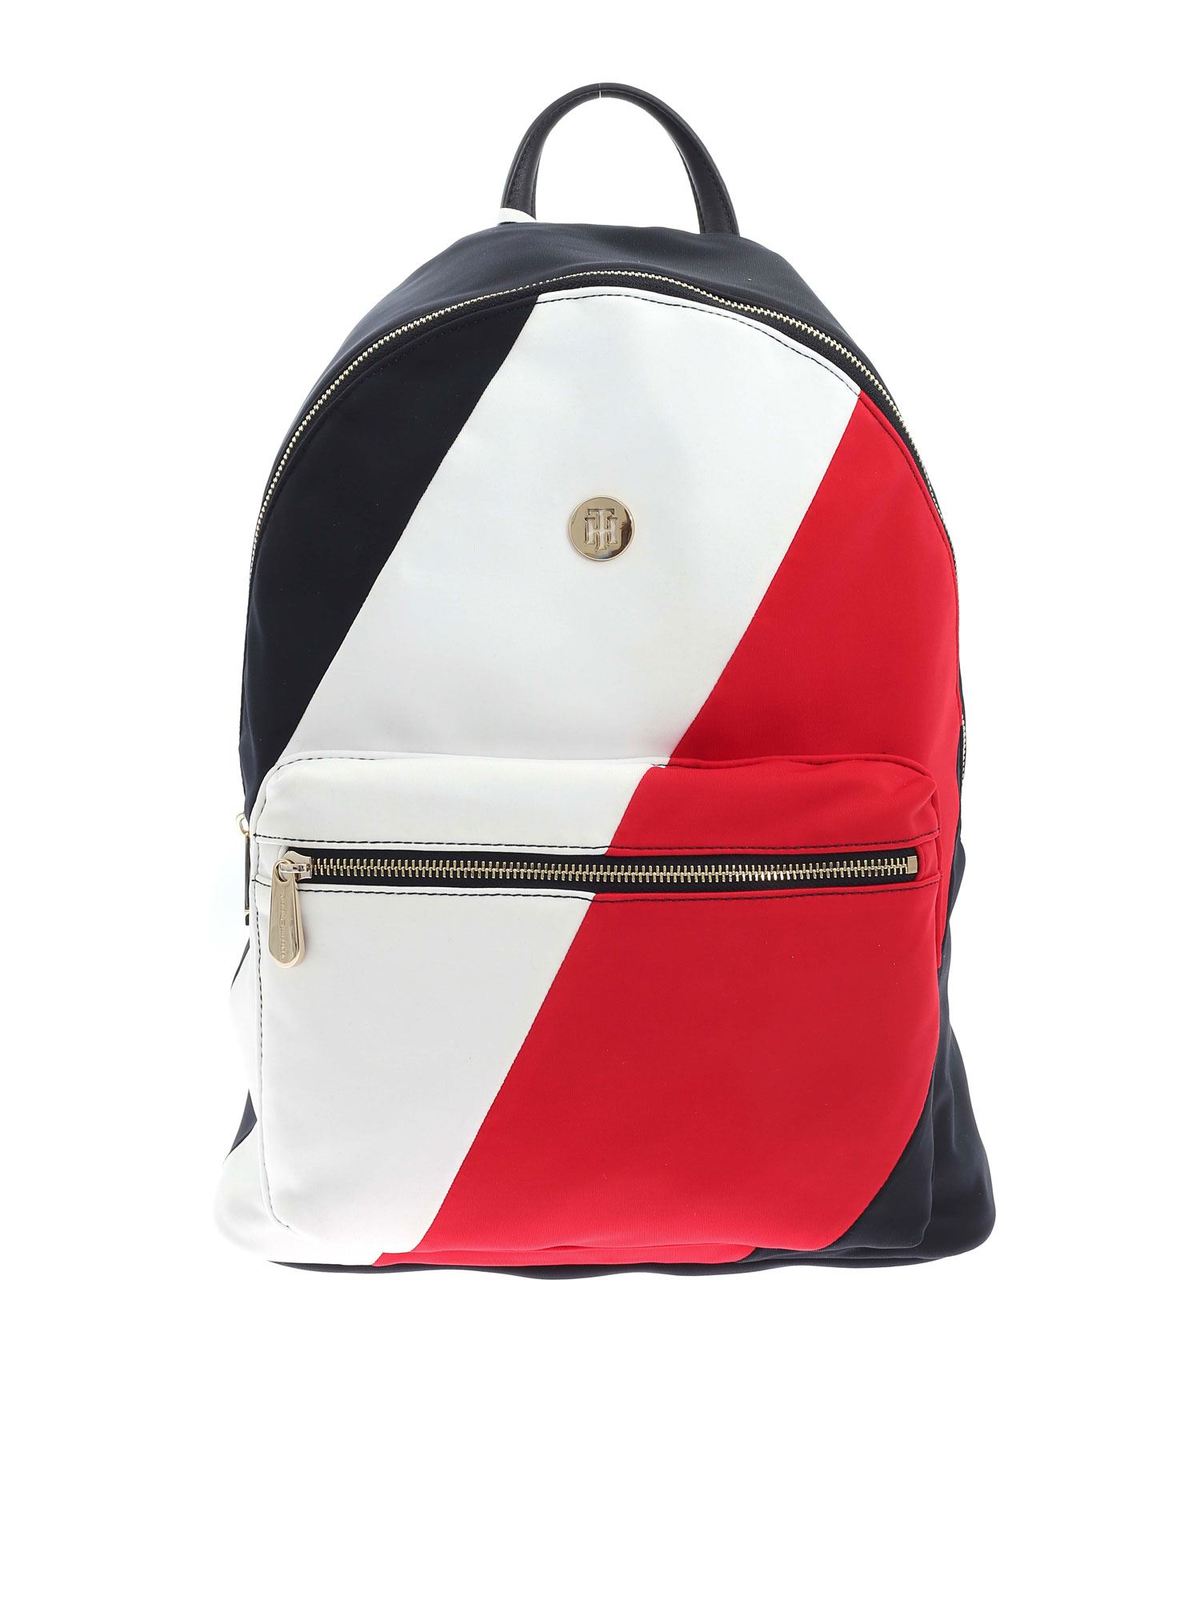 TOMMY HILFIGER POPPY BACKPACK IN BLUE